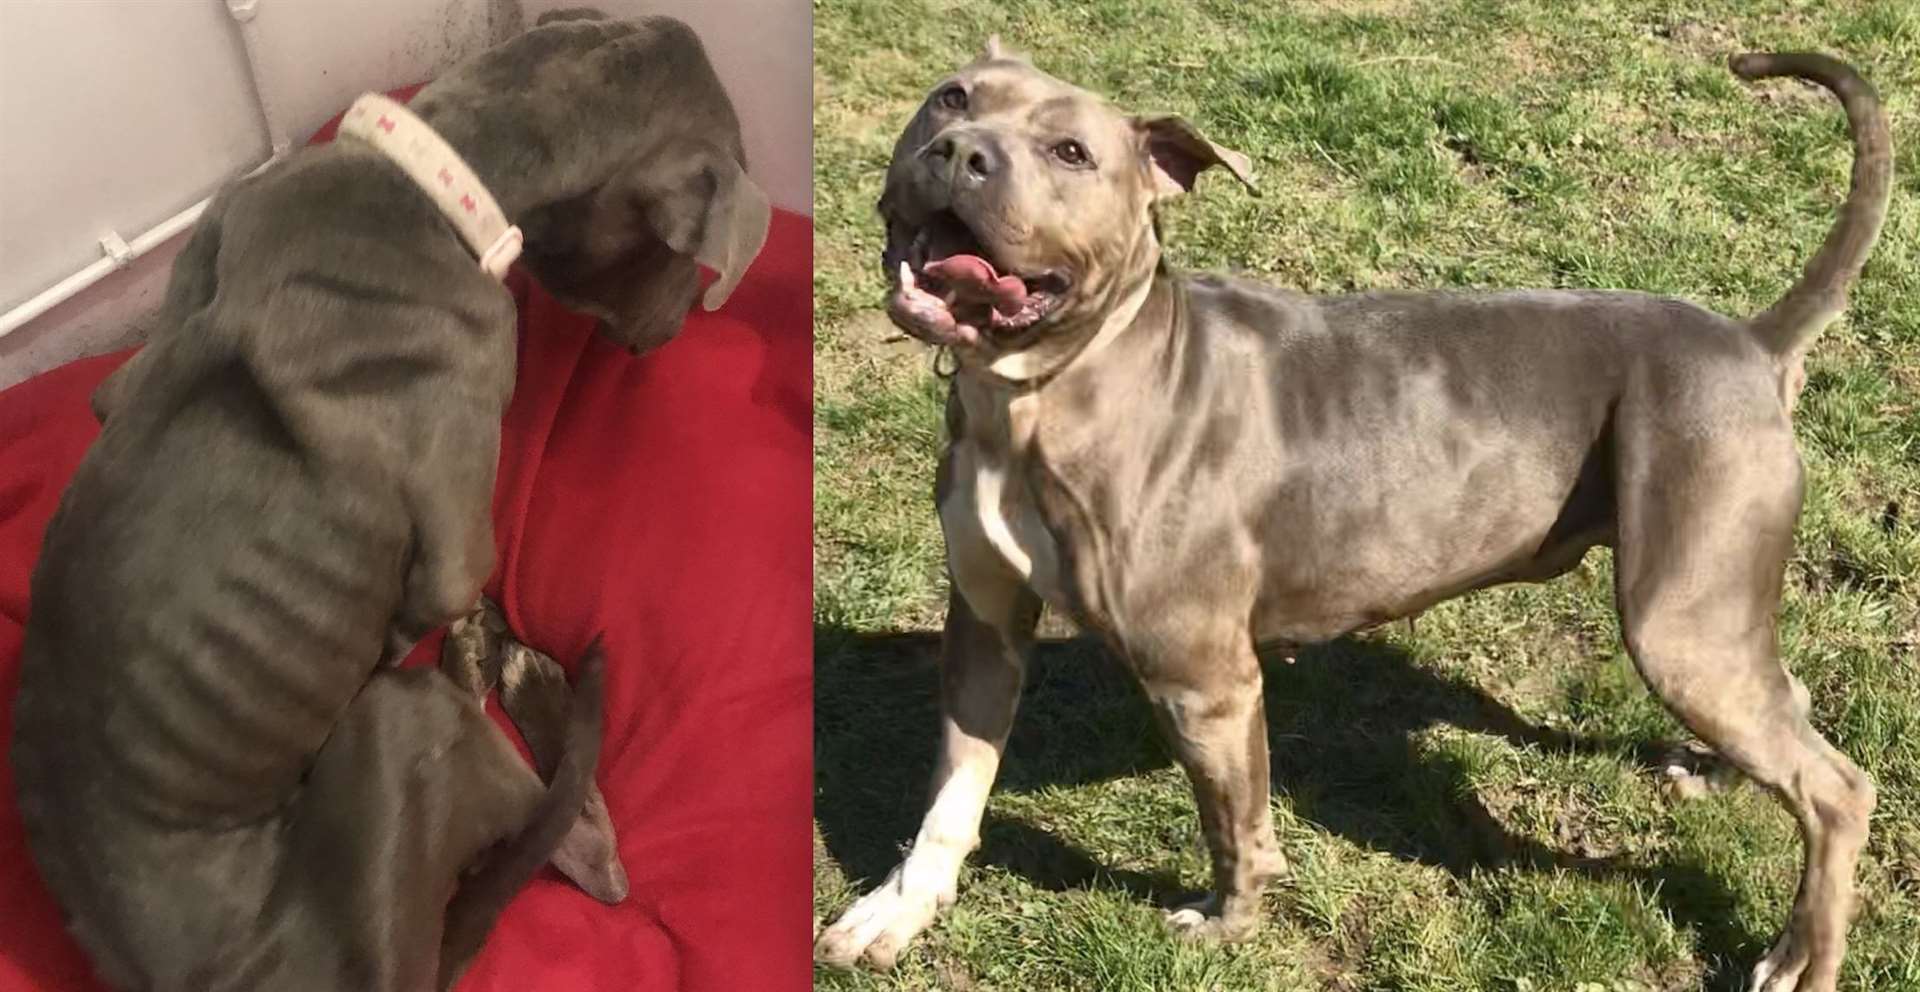 Tegan before and after arriving at South East Dog Rescue